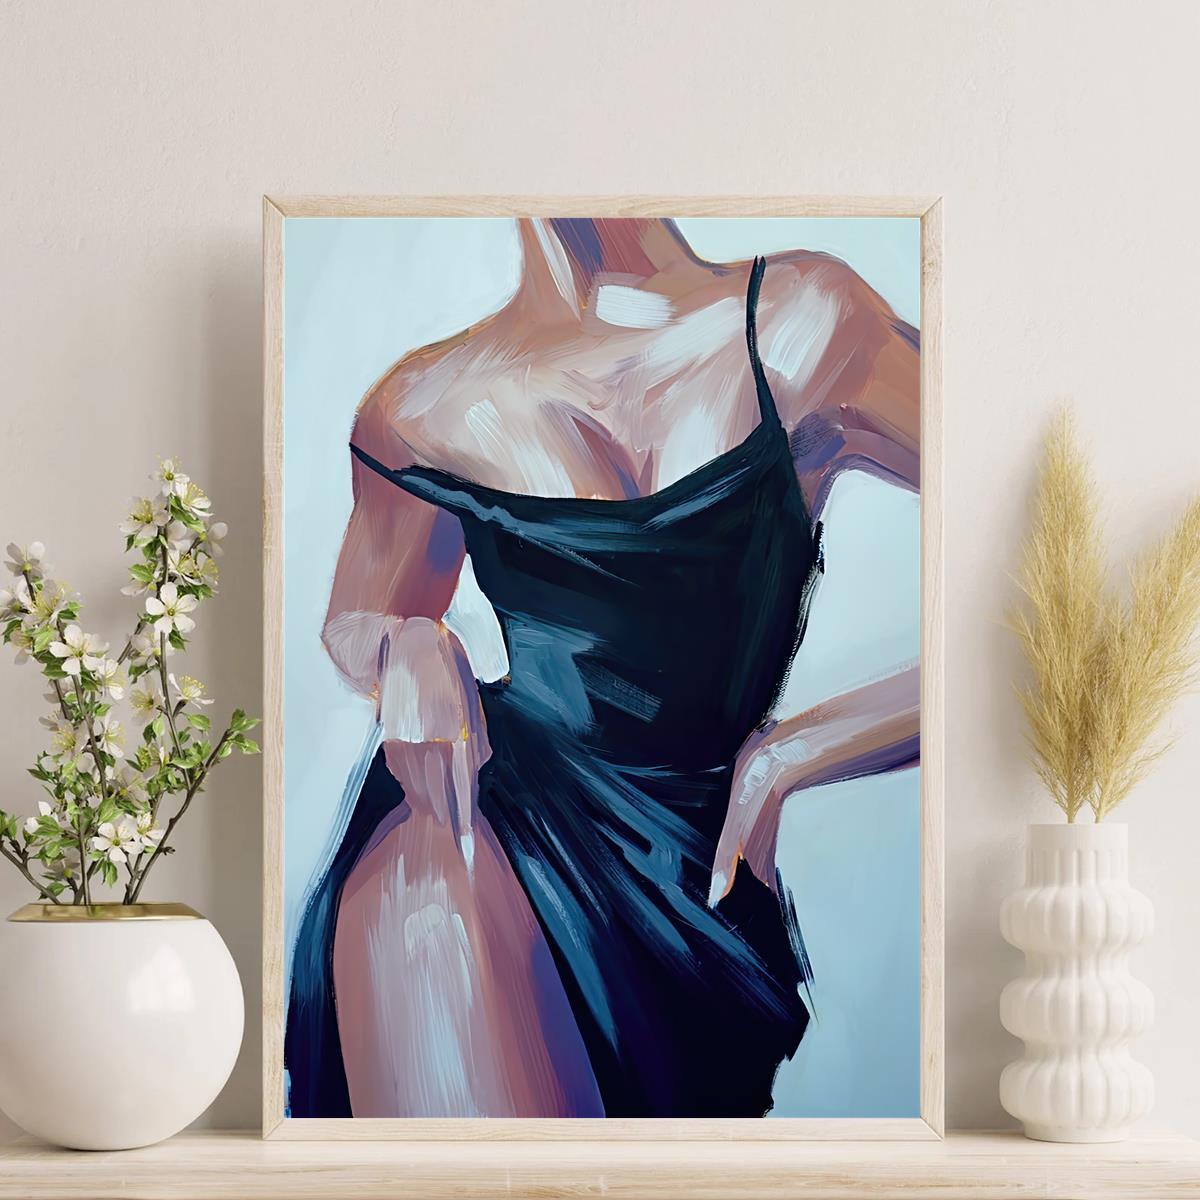 1pc unframed canvas poster modern sexy woman art diverse aesthetic female body poster the human body art oil painting art sexuality poster ideal gift for home bedroom living room bathroom bar coffee shop wall art wall decoration fall decor